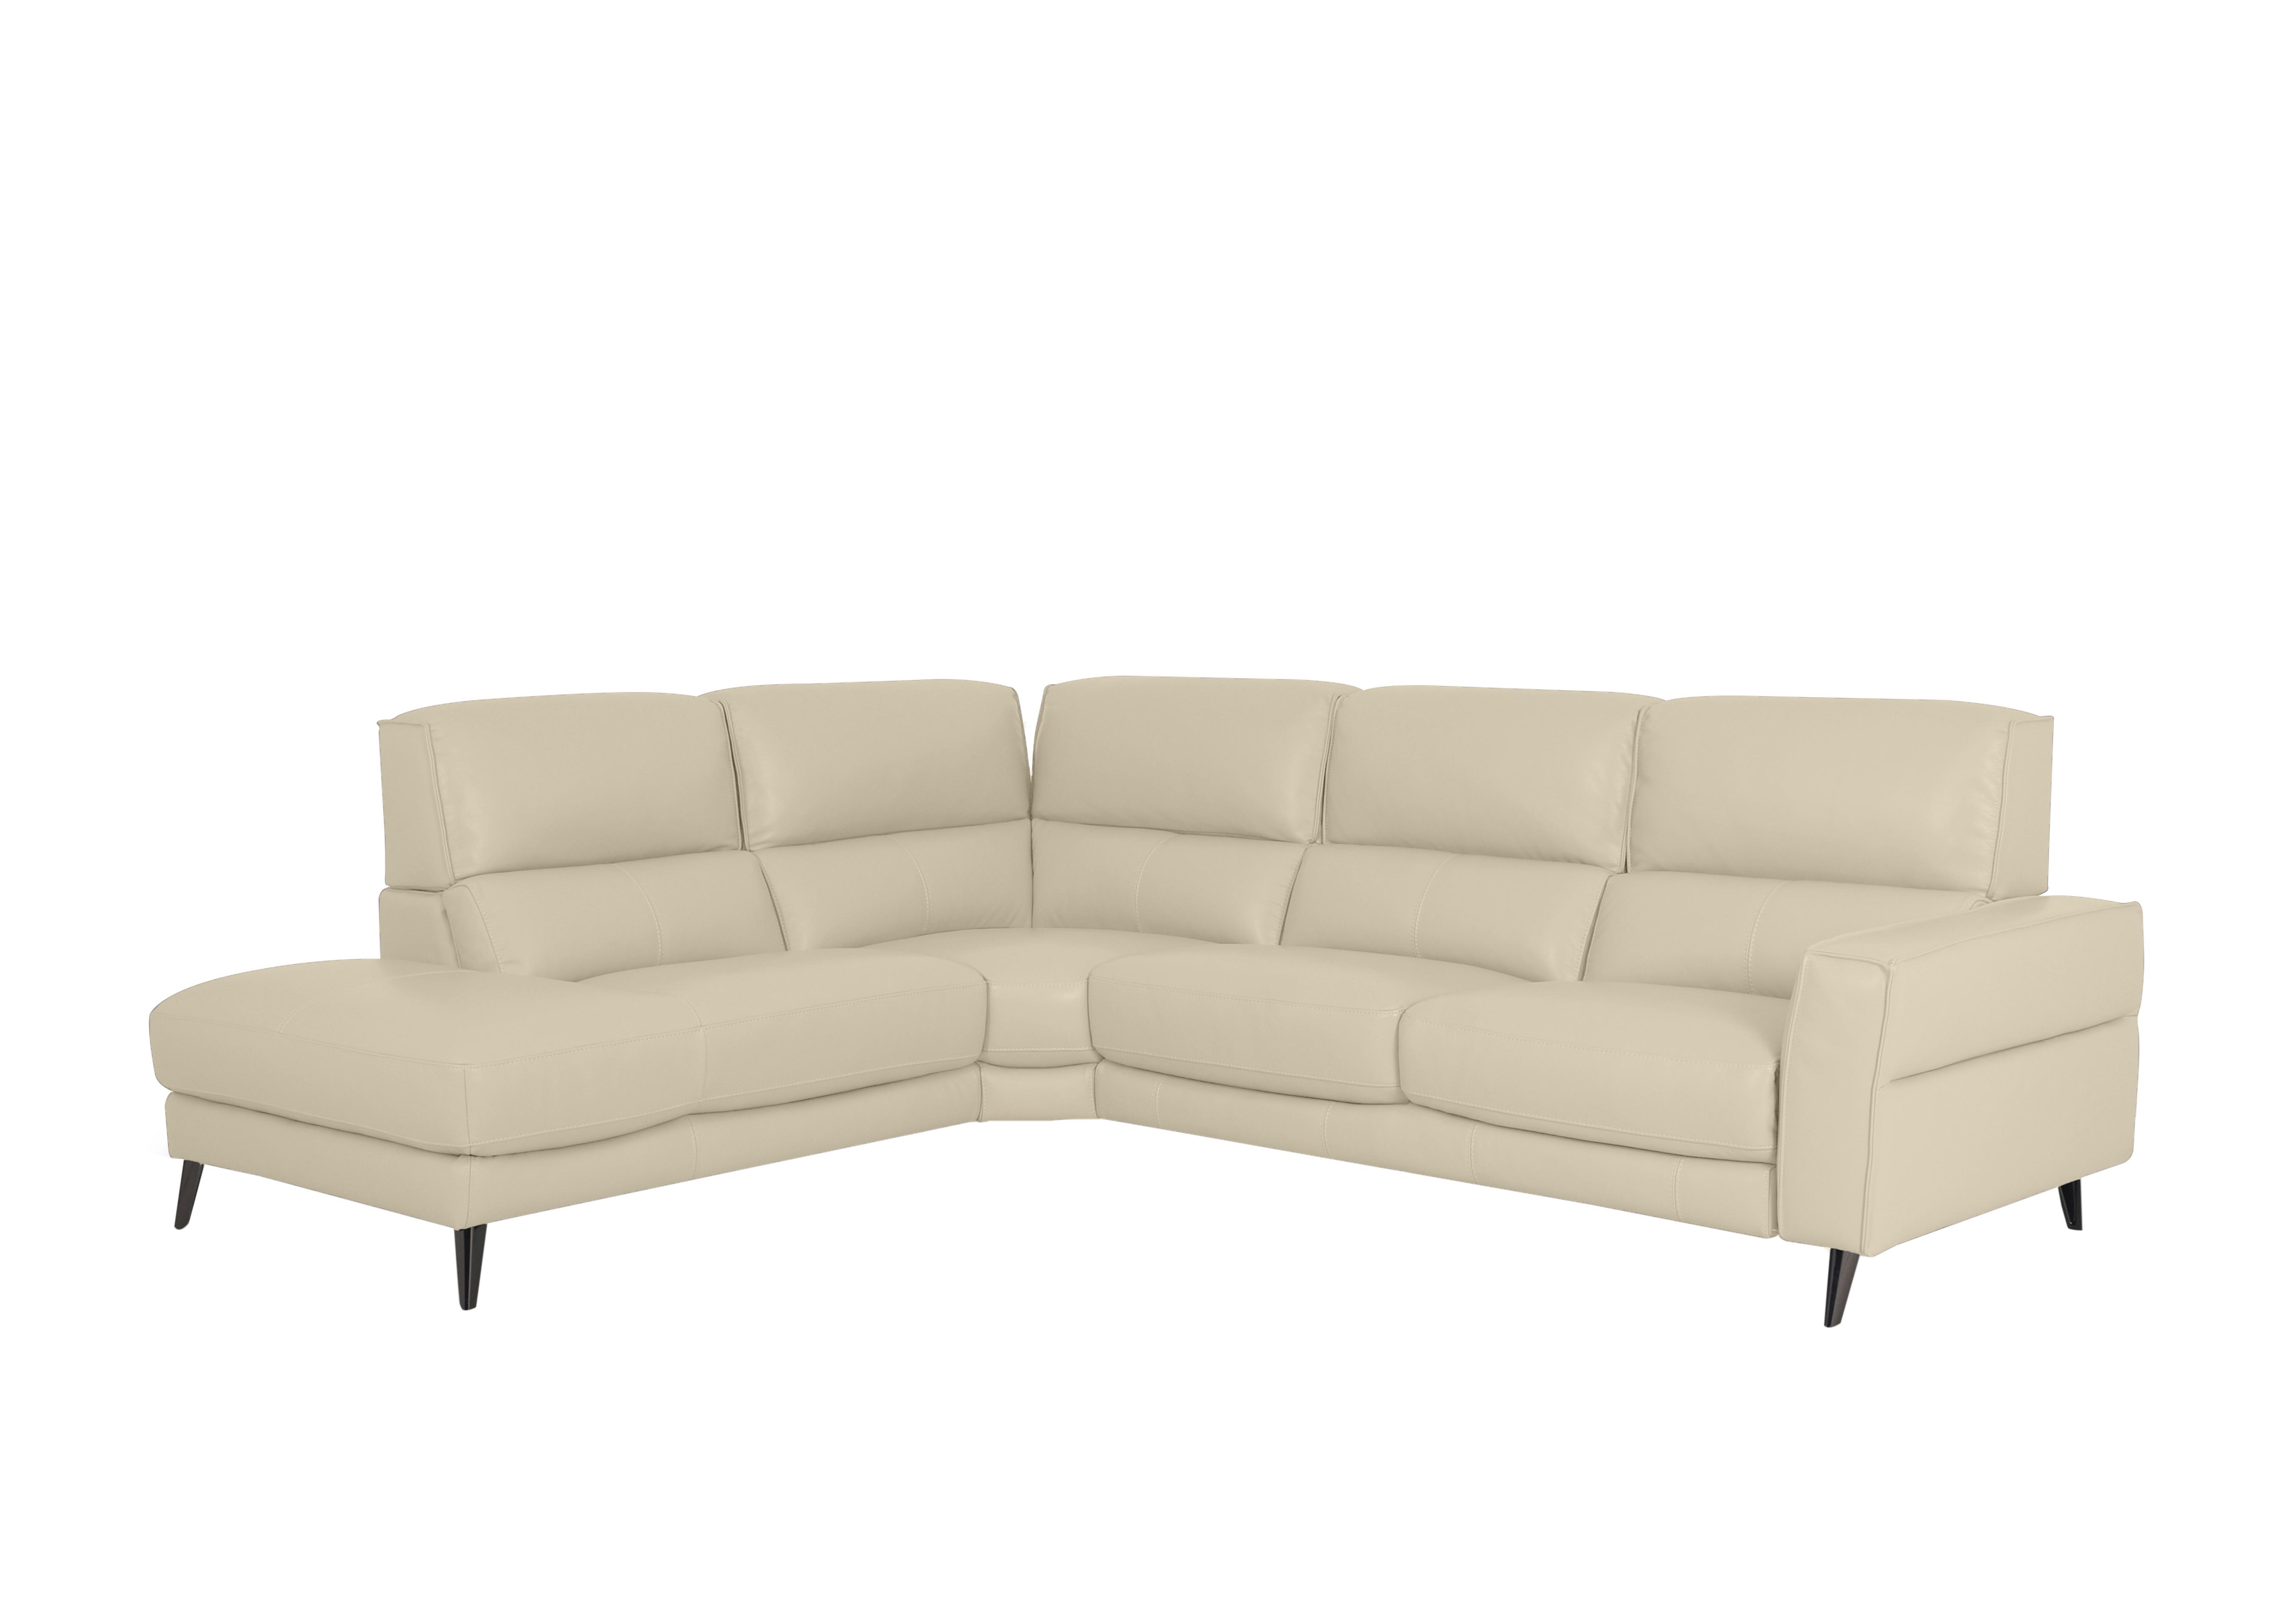 Axel Leather Chaise End Sofa in Bv-862c Bisque on Furniture Village